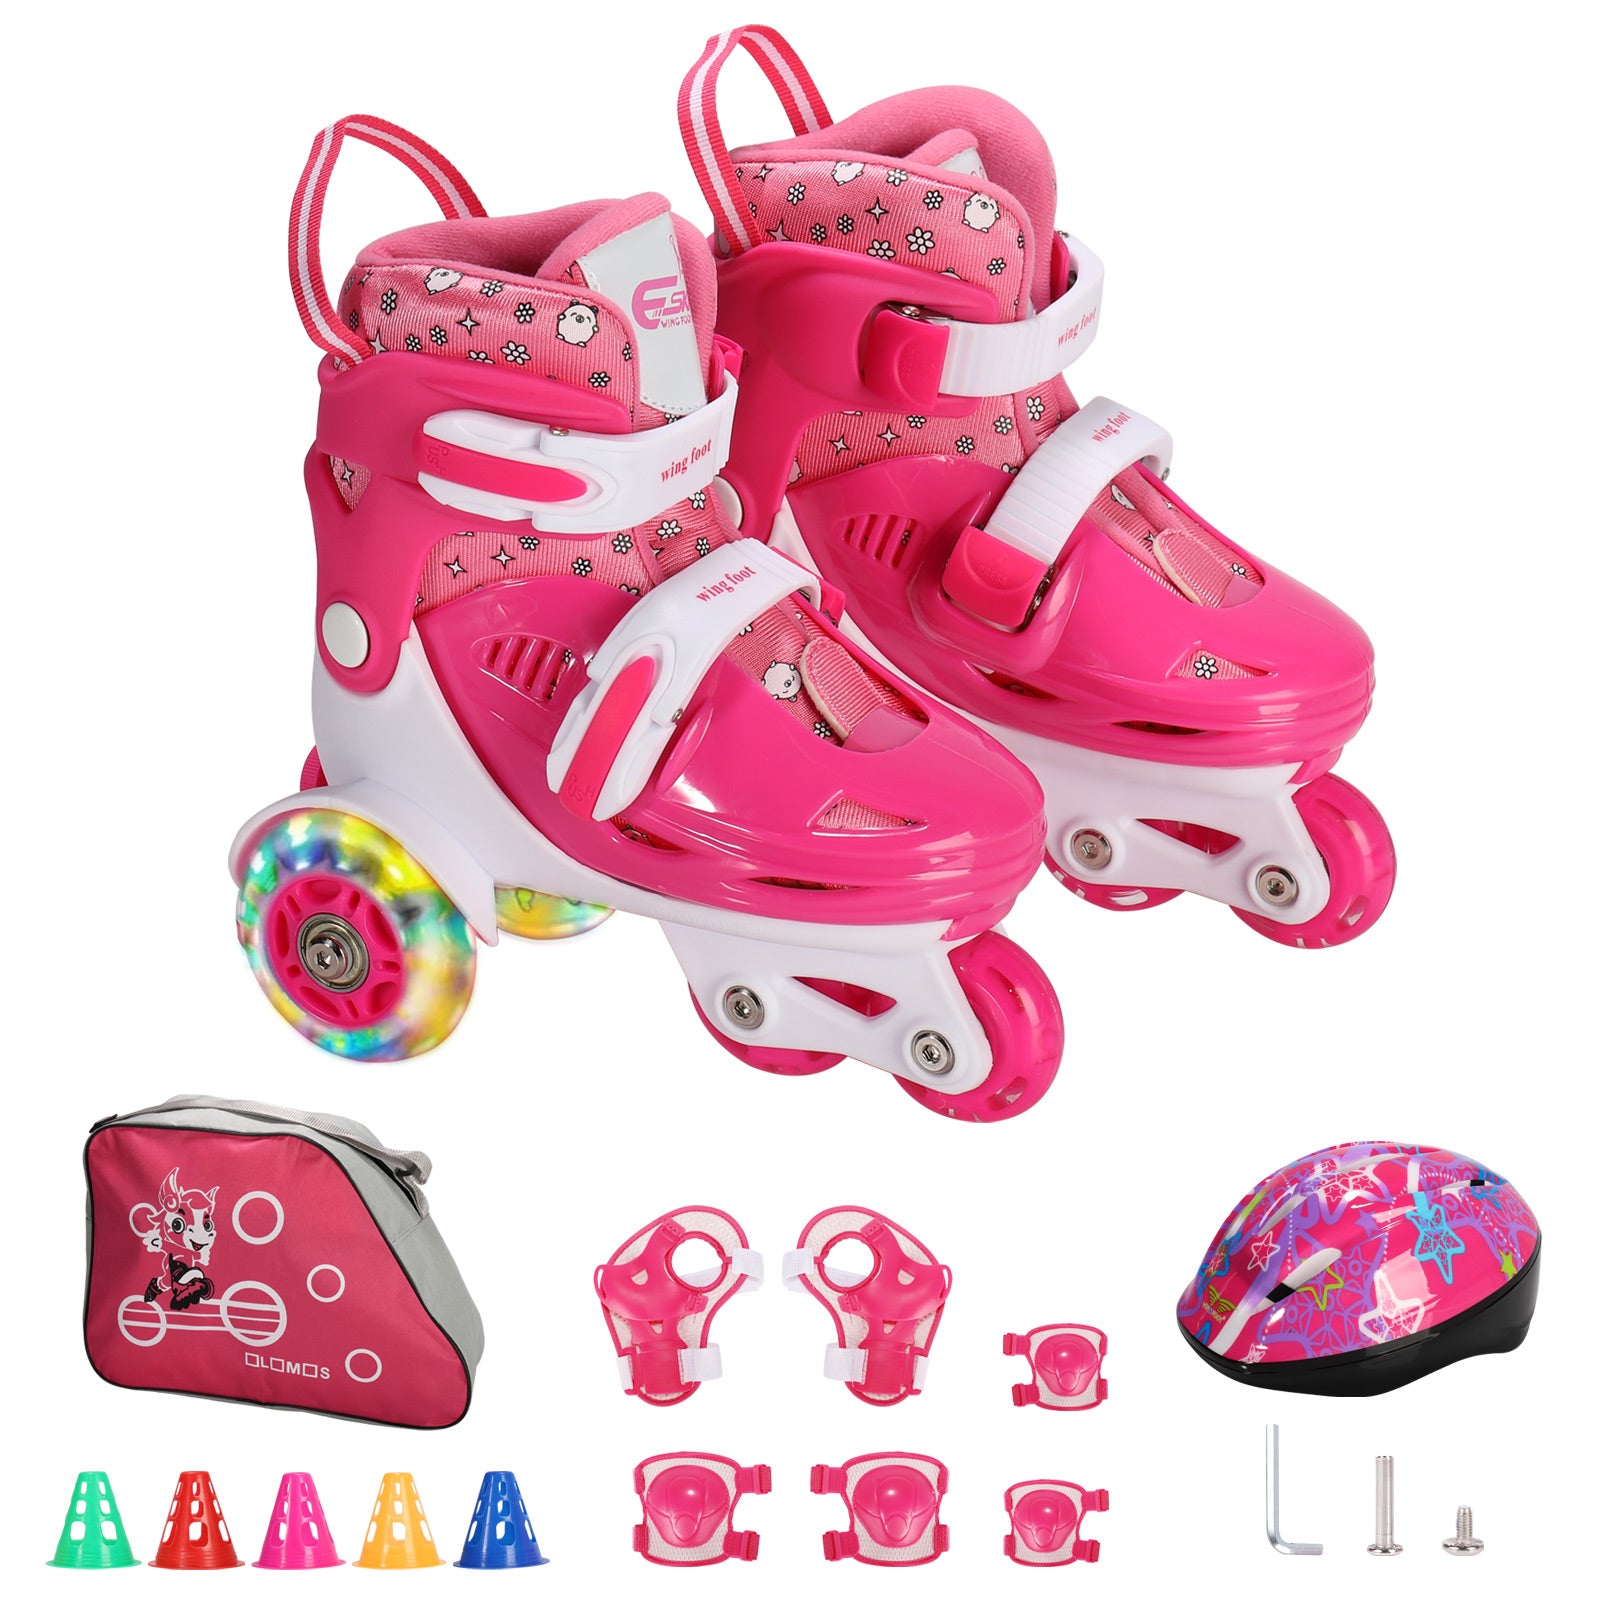 Kids Roller Skates Light Up LED Wheels Kids Roller Skates Shoes Includes 6 Pack Protective Gear for Ages 5-8 Years